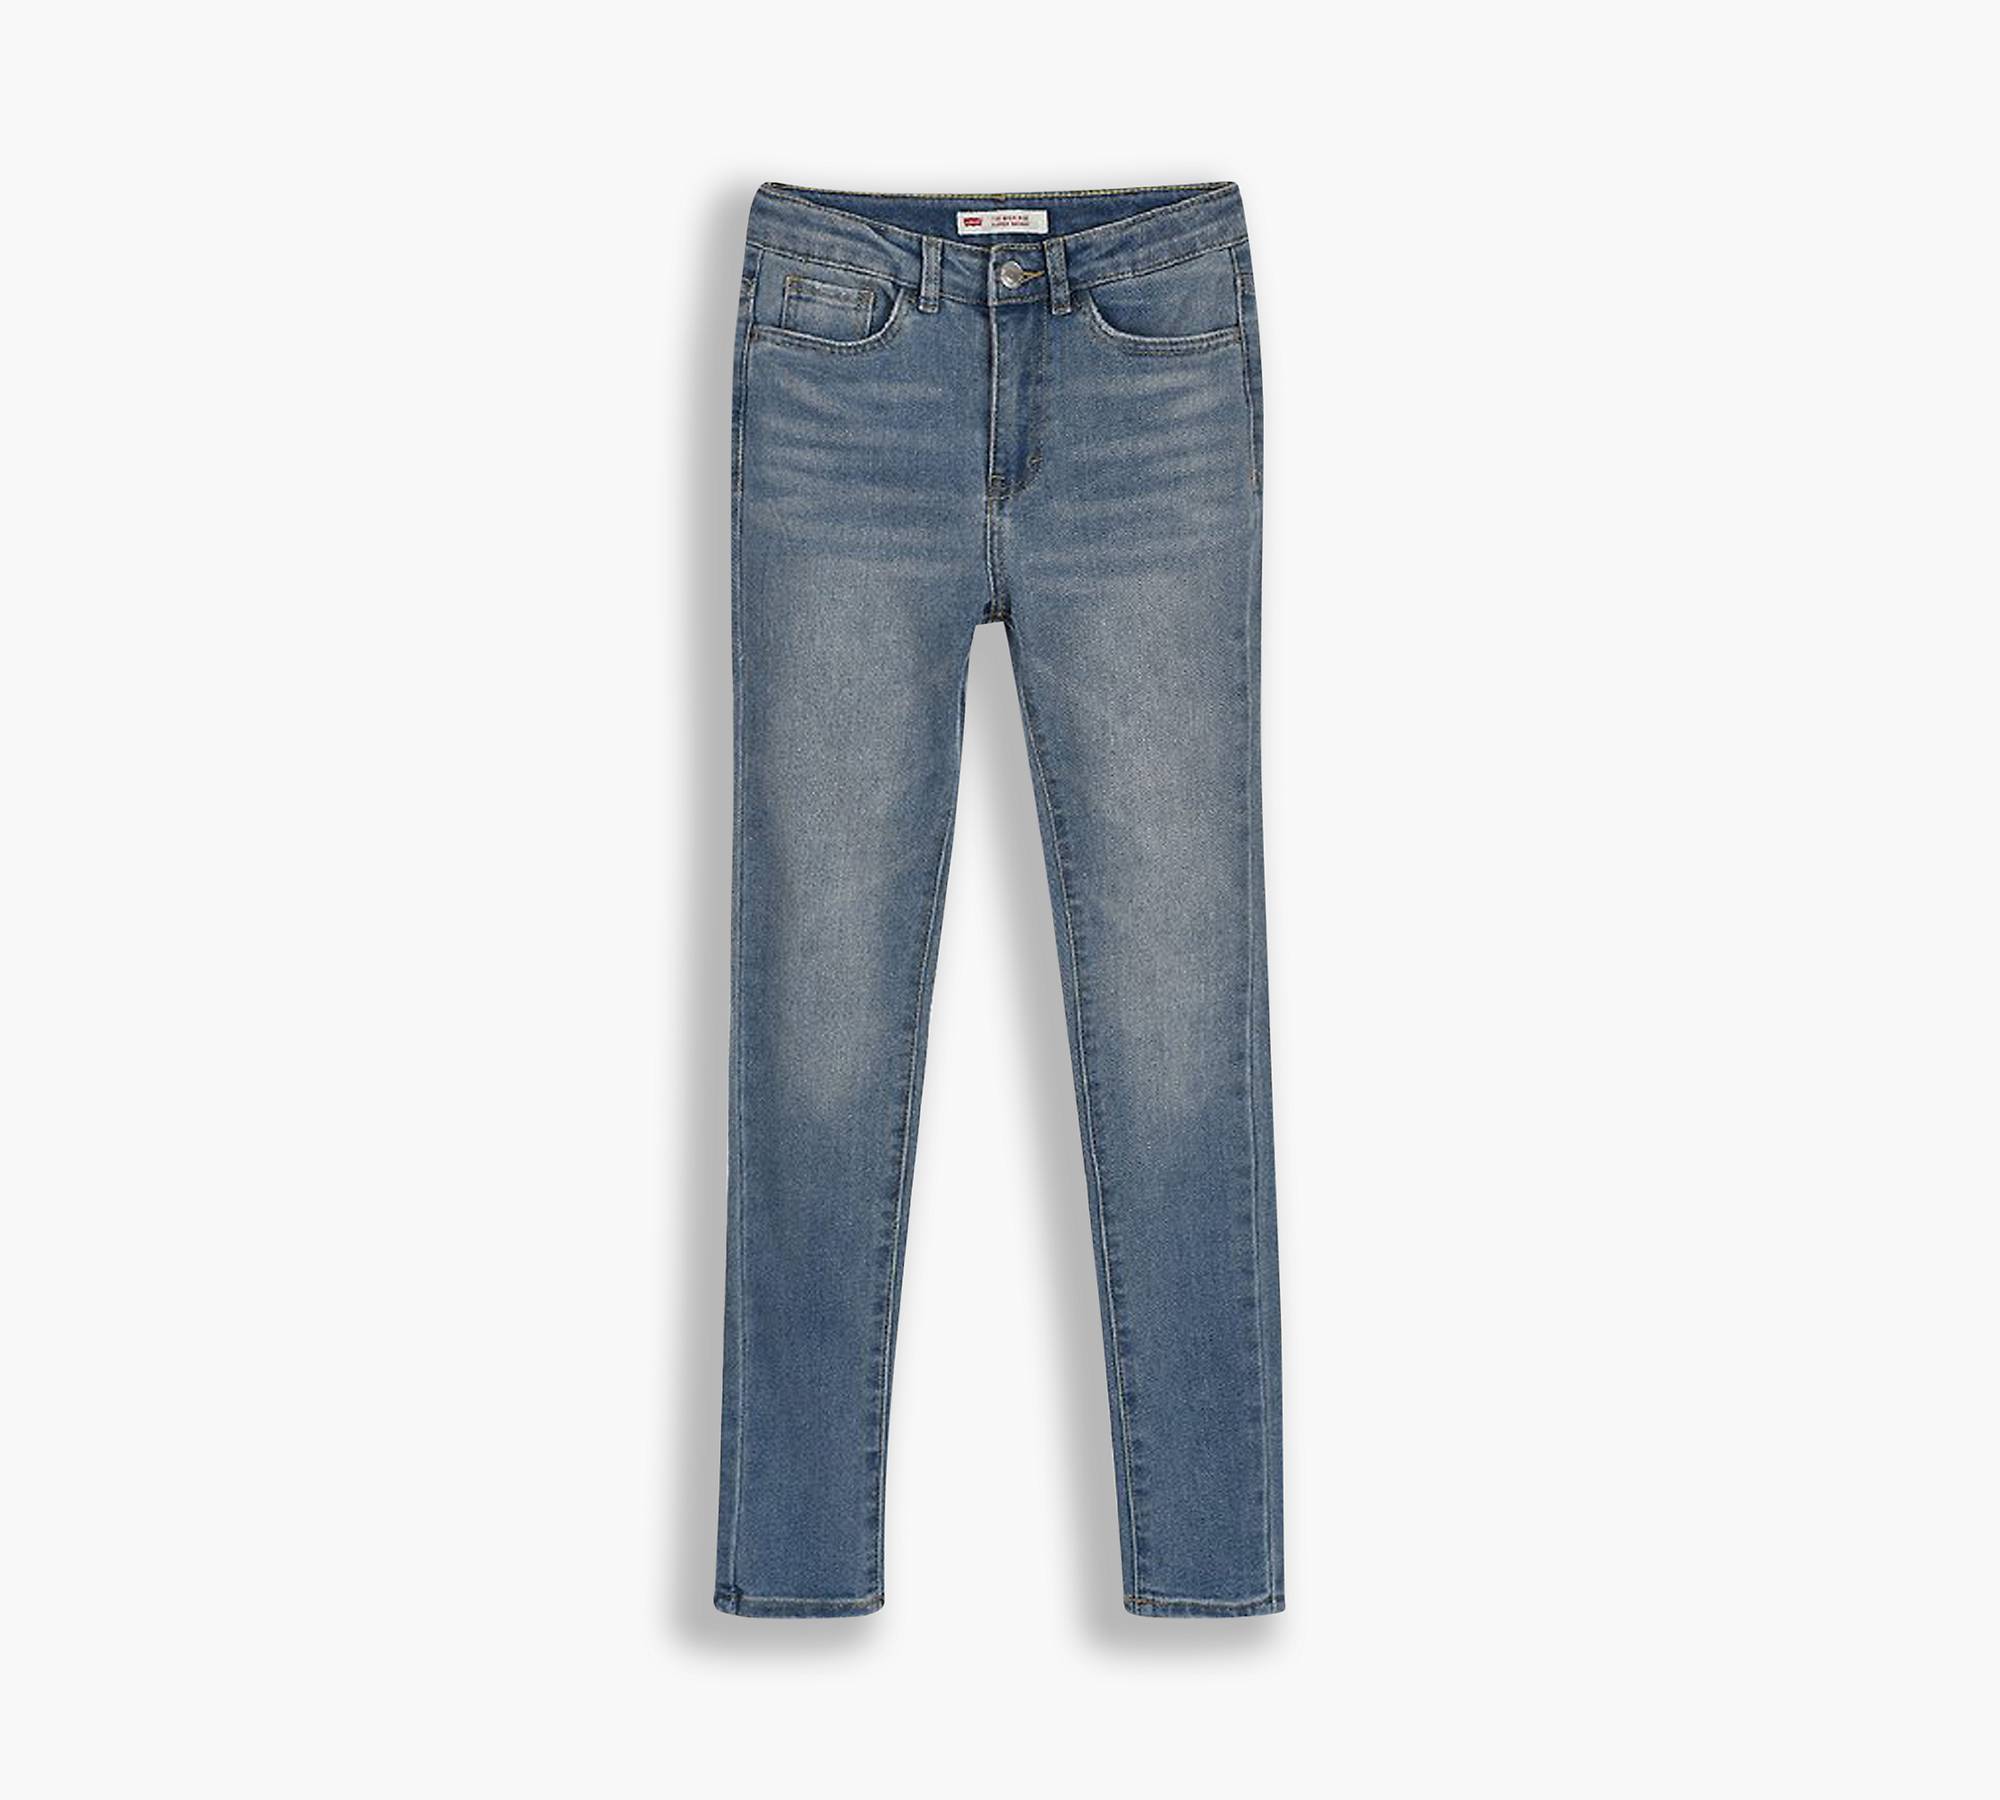 Teenager 720™ High-Waisted Super Skinny Jeans 1